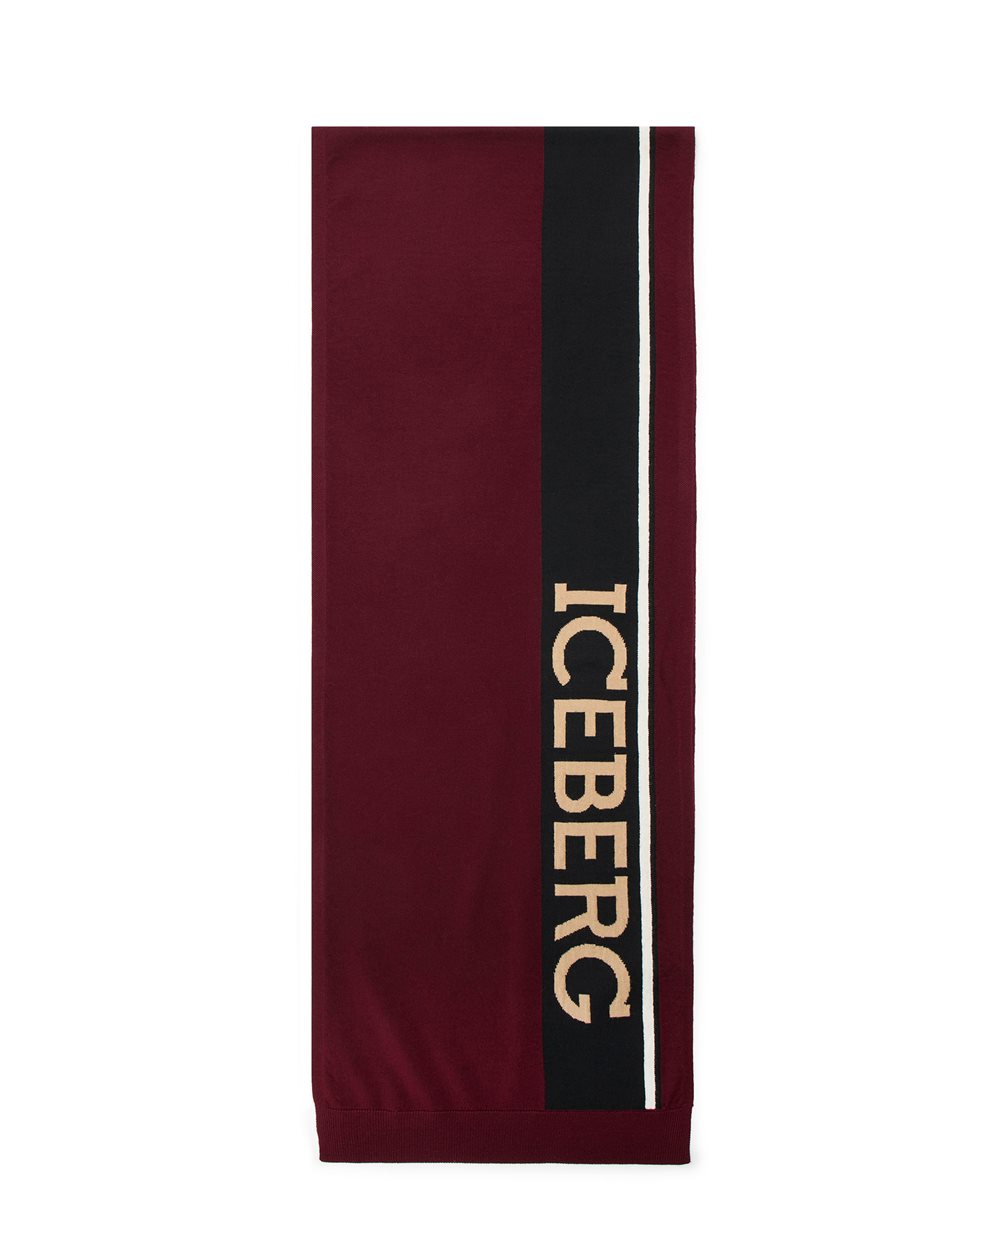 Bordeaux scarf in wool with logo -  ( PRIMO STEP DE ) PROMO SALDI UP TO 40% | Iceberg - Official Website